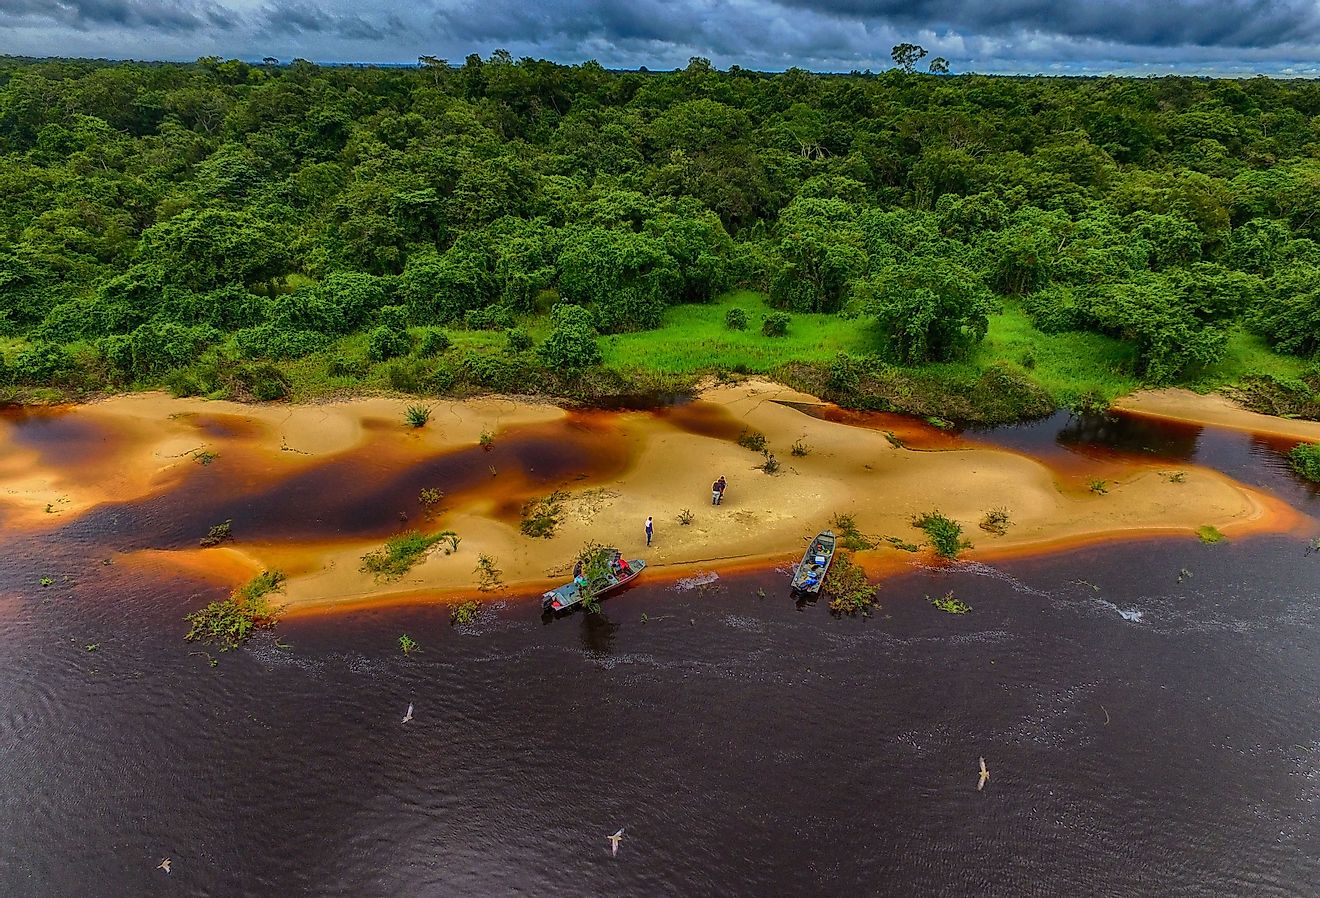 This is a beach that lies on the banks of the Guaporé River, in a place known as Zaballa that borders Brazil and Bolivia.